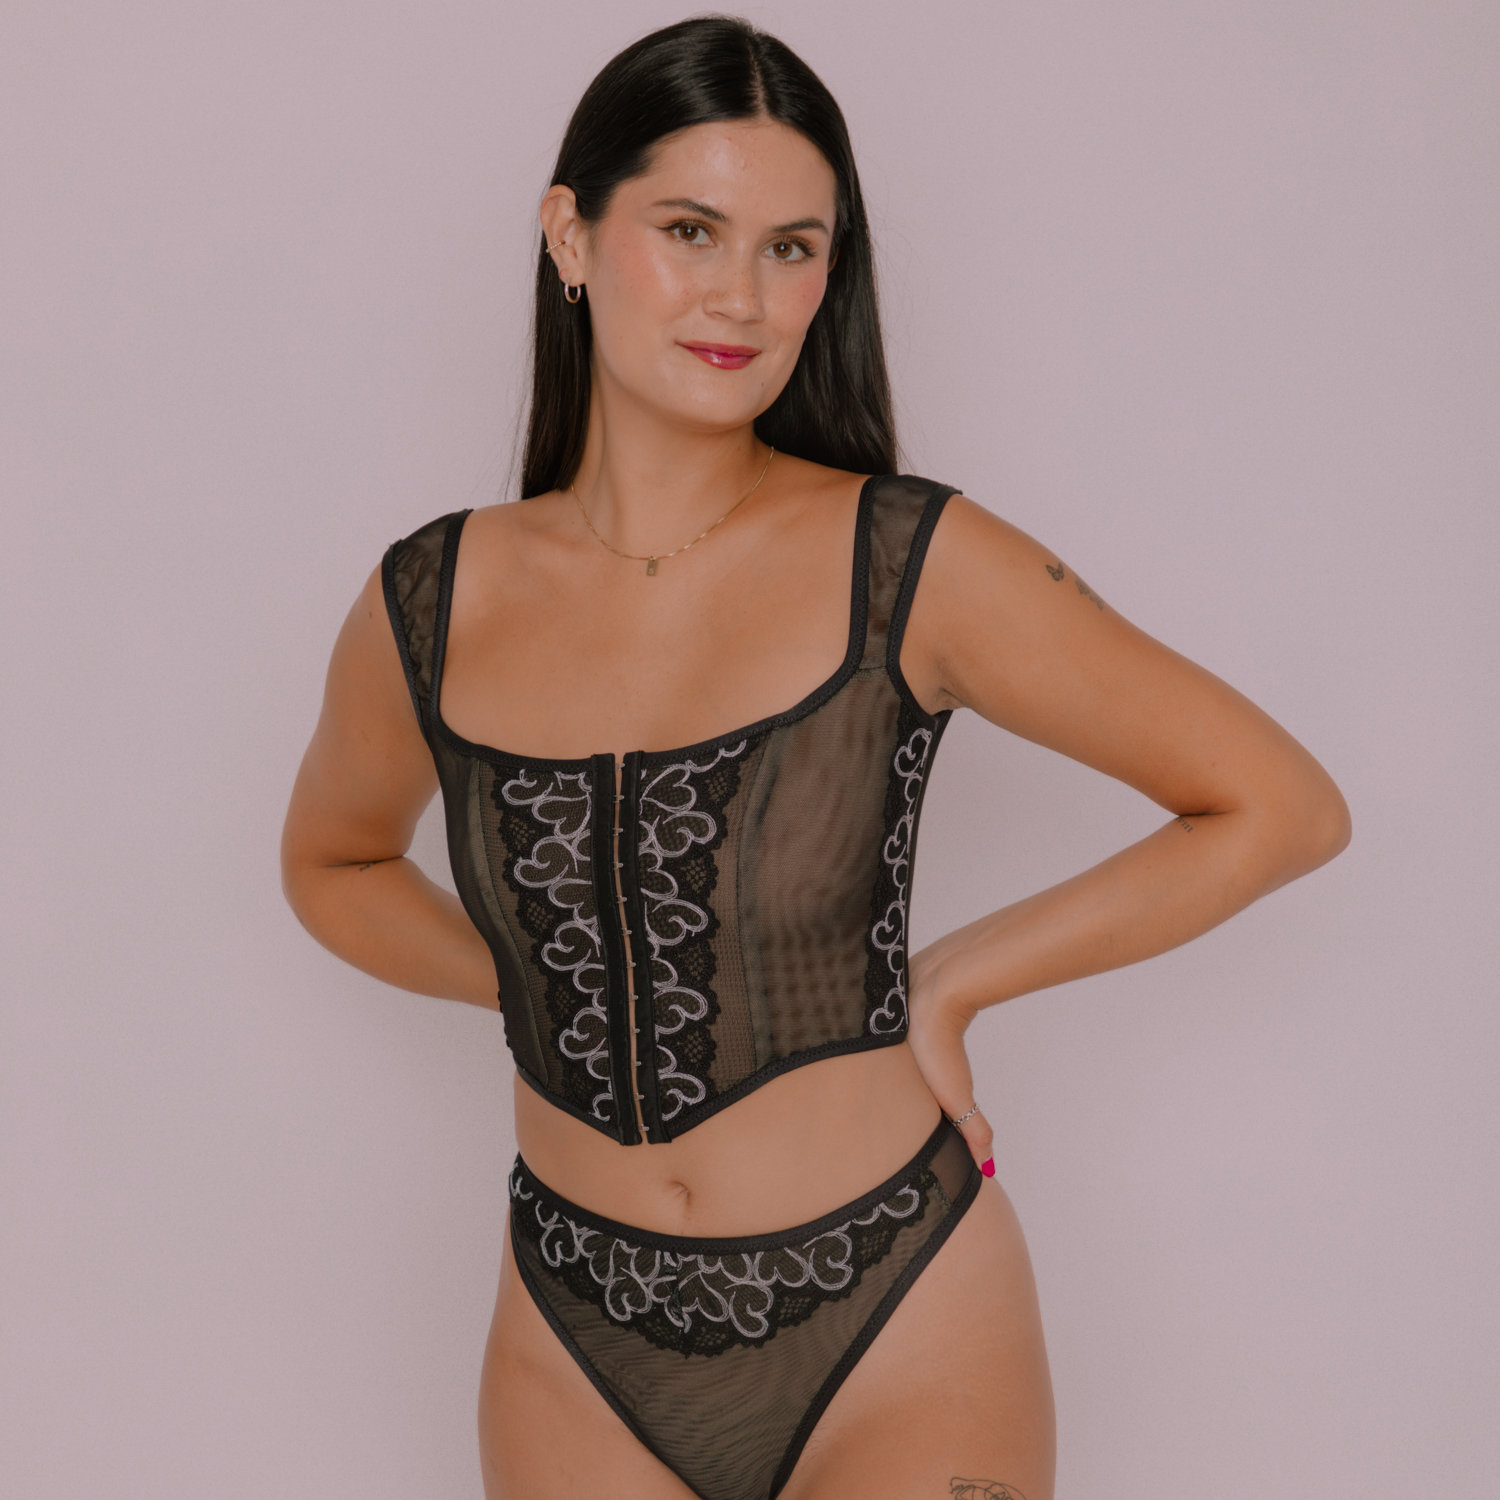 Madalynne Odessa Corset Top and Panty (free) - The Fold Line